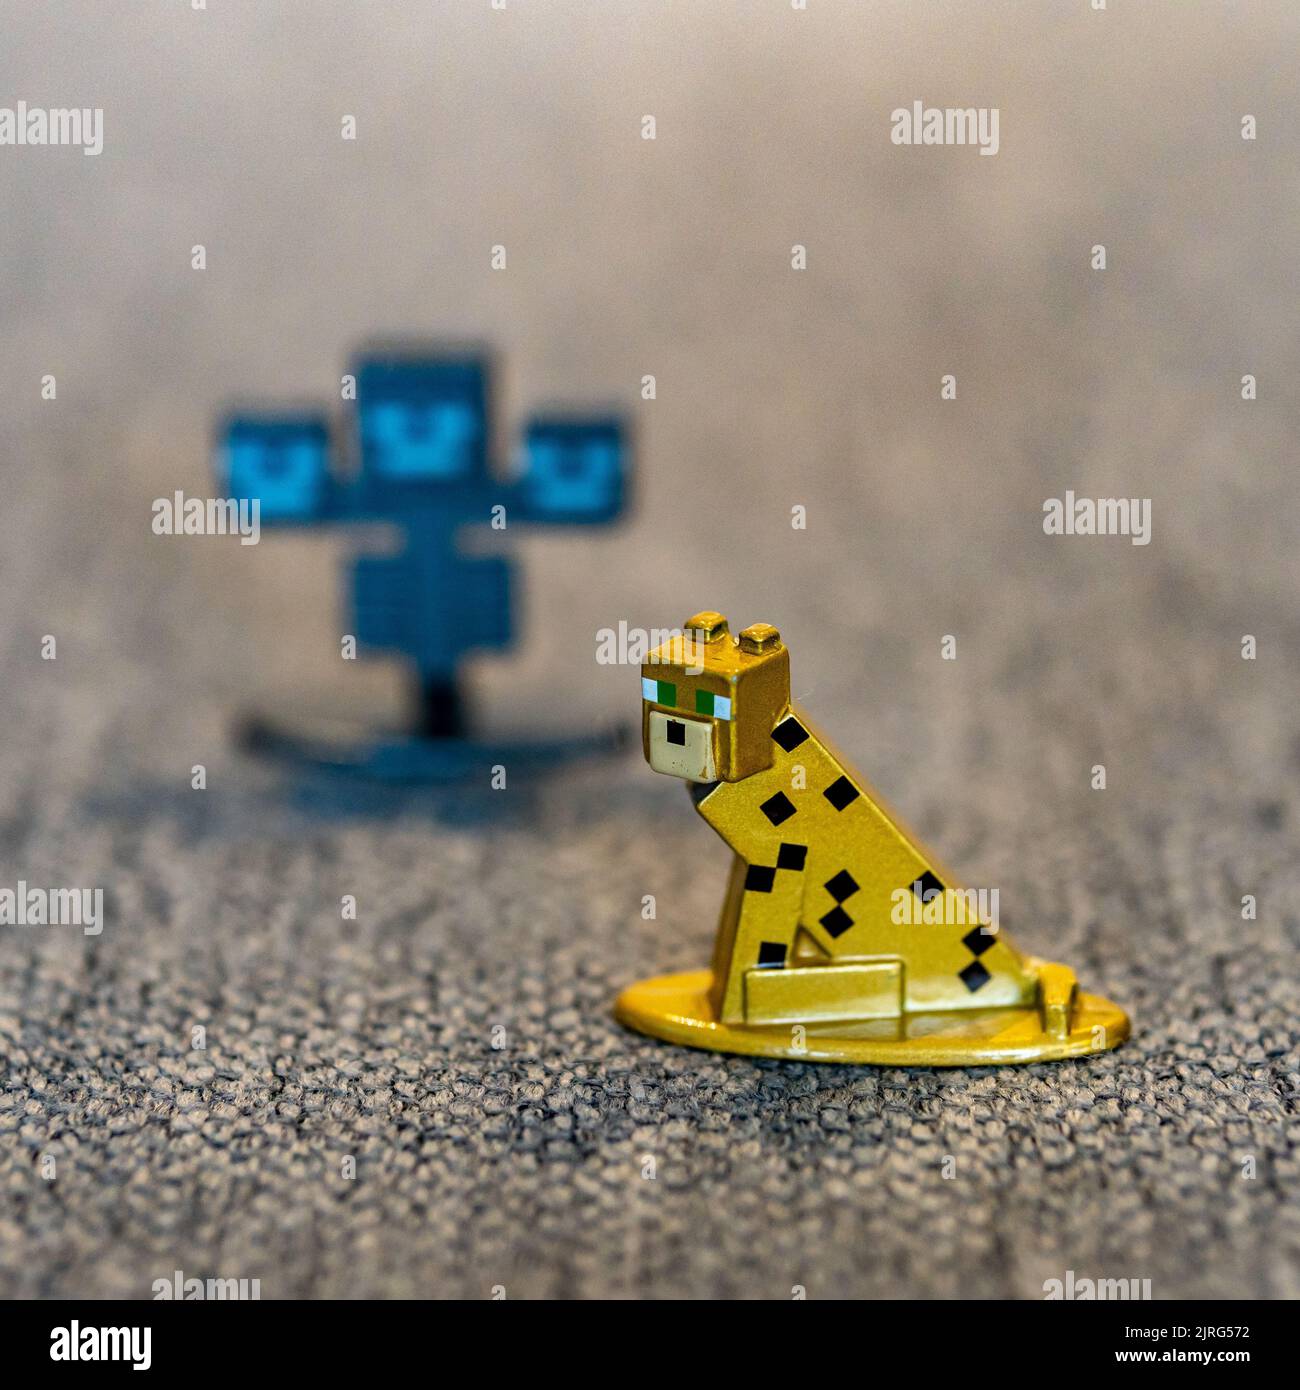 A closeup shot of a Minecraft ocelot cat toy figurine made of metal. Stock Photo